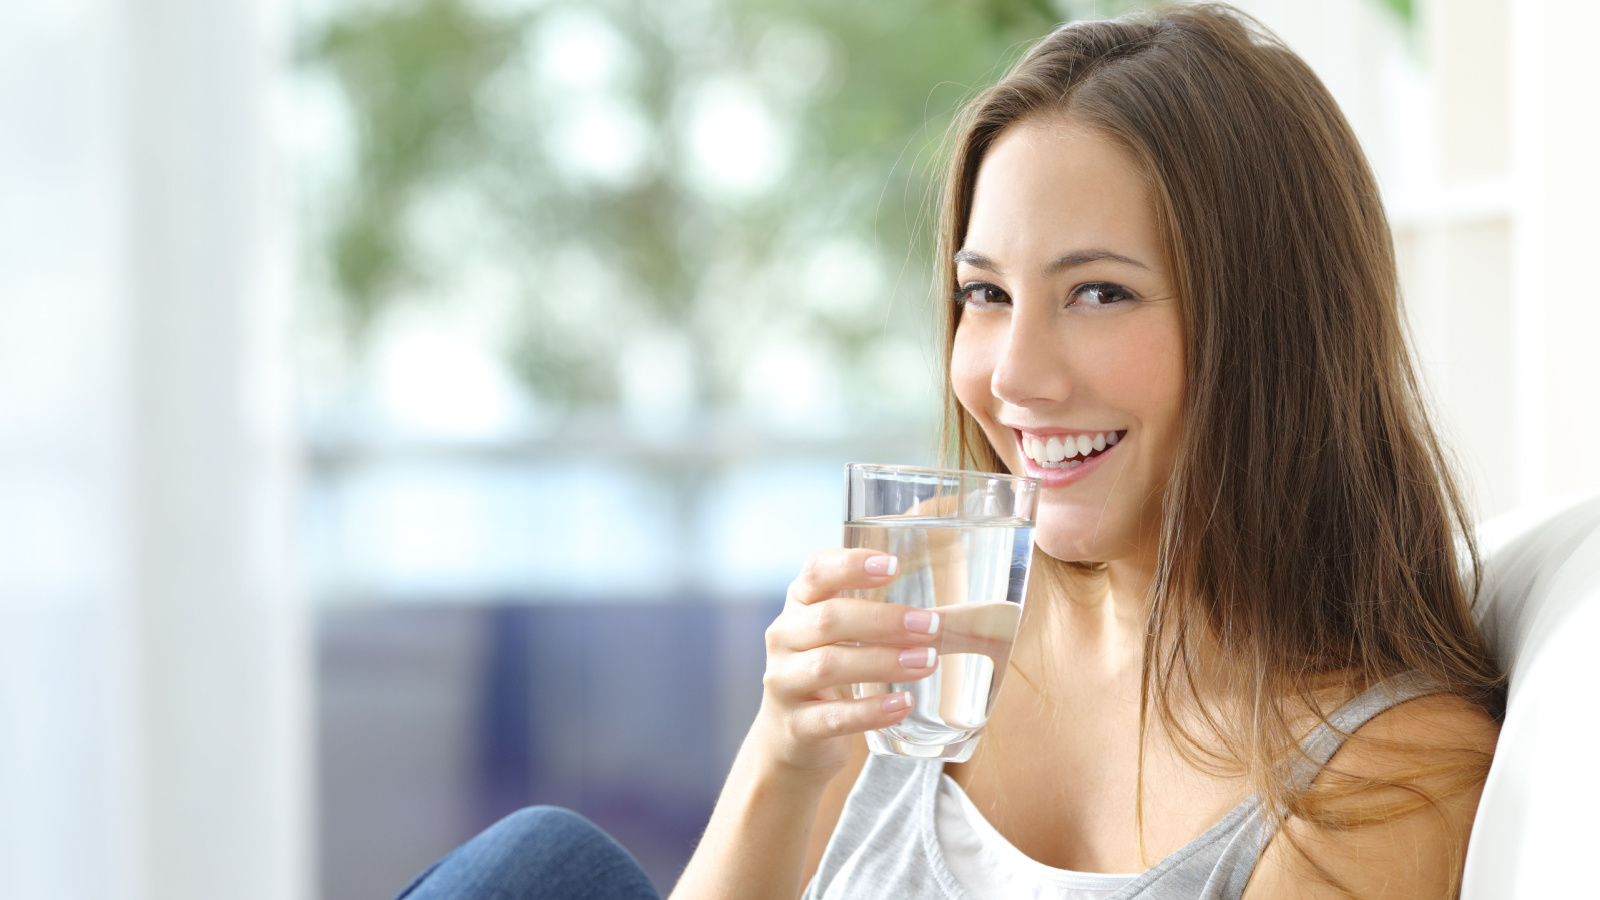 image credit: Antonio-Guillem/Shutterstock <p><span>Not drinking enough water leads to dehydration, which can impair cognitive function and concentration. Chronic dehydration can contribute to the development of dementia. Staying hydrated is simple yet crucial for brain health. Keep the water flowing for a healthy brain.</span></p>